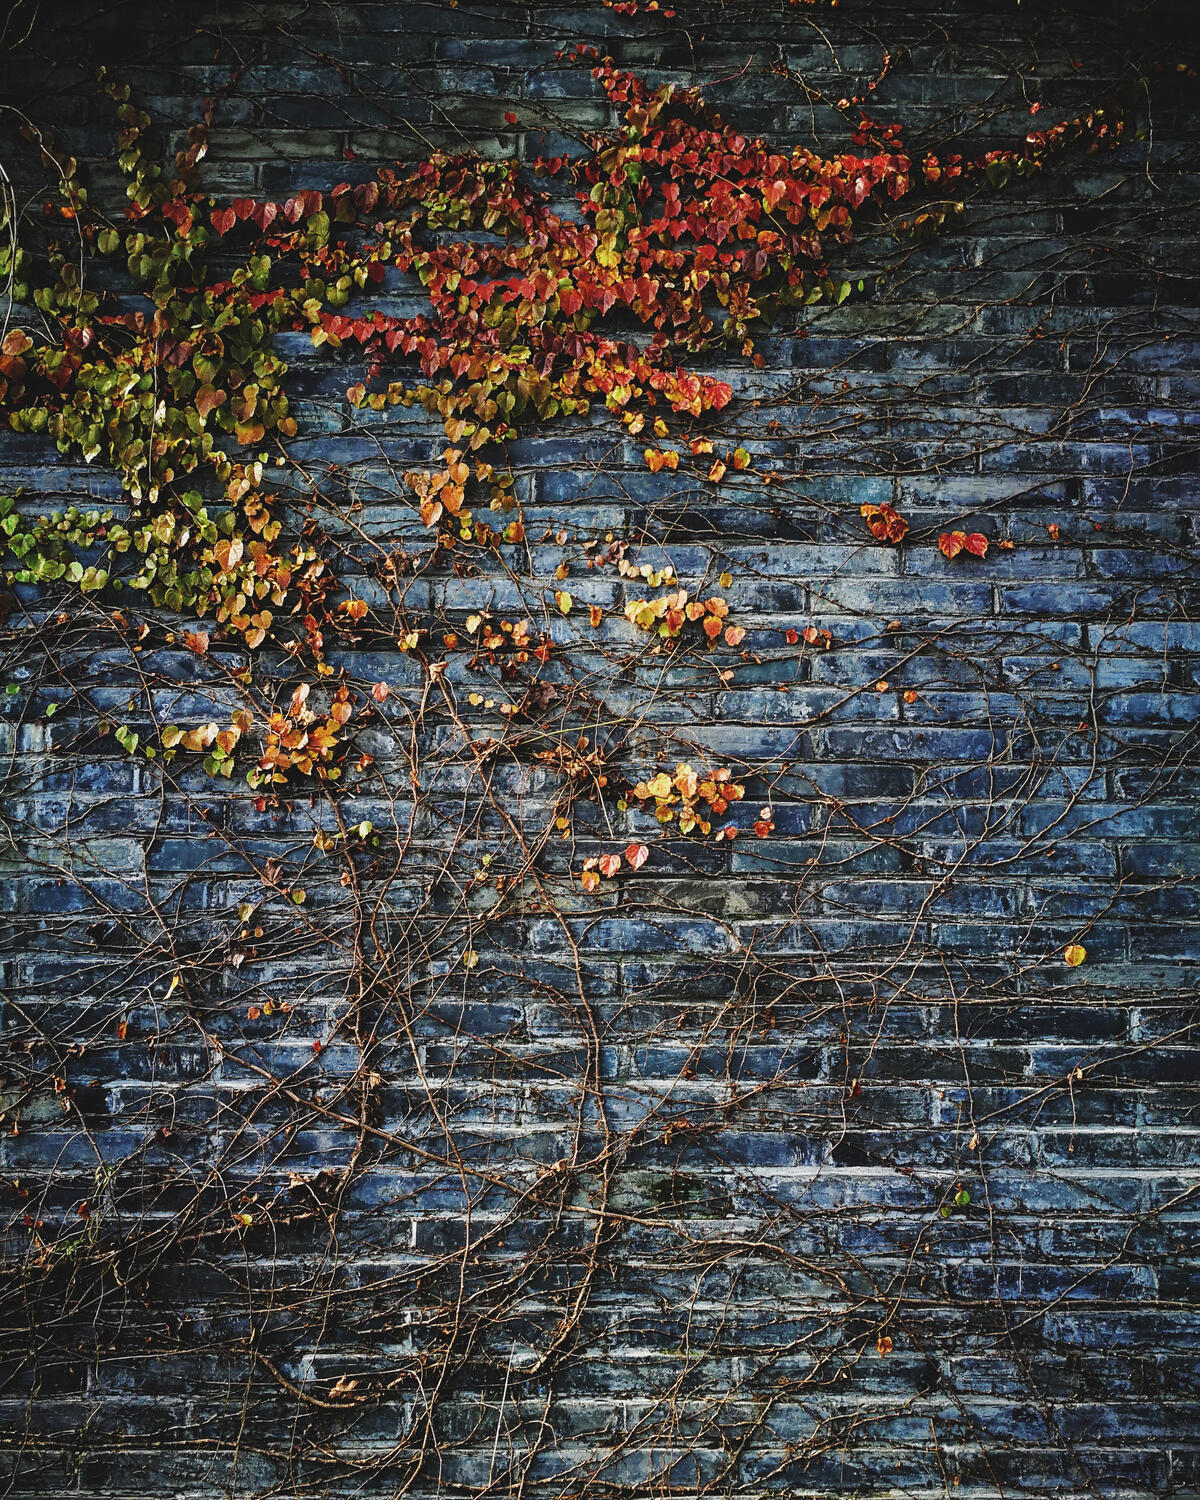 A grape bush is growing on an old brick wall